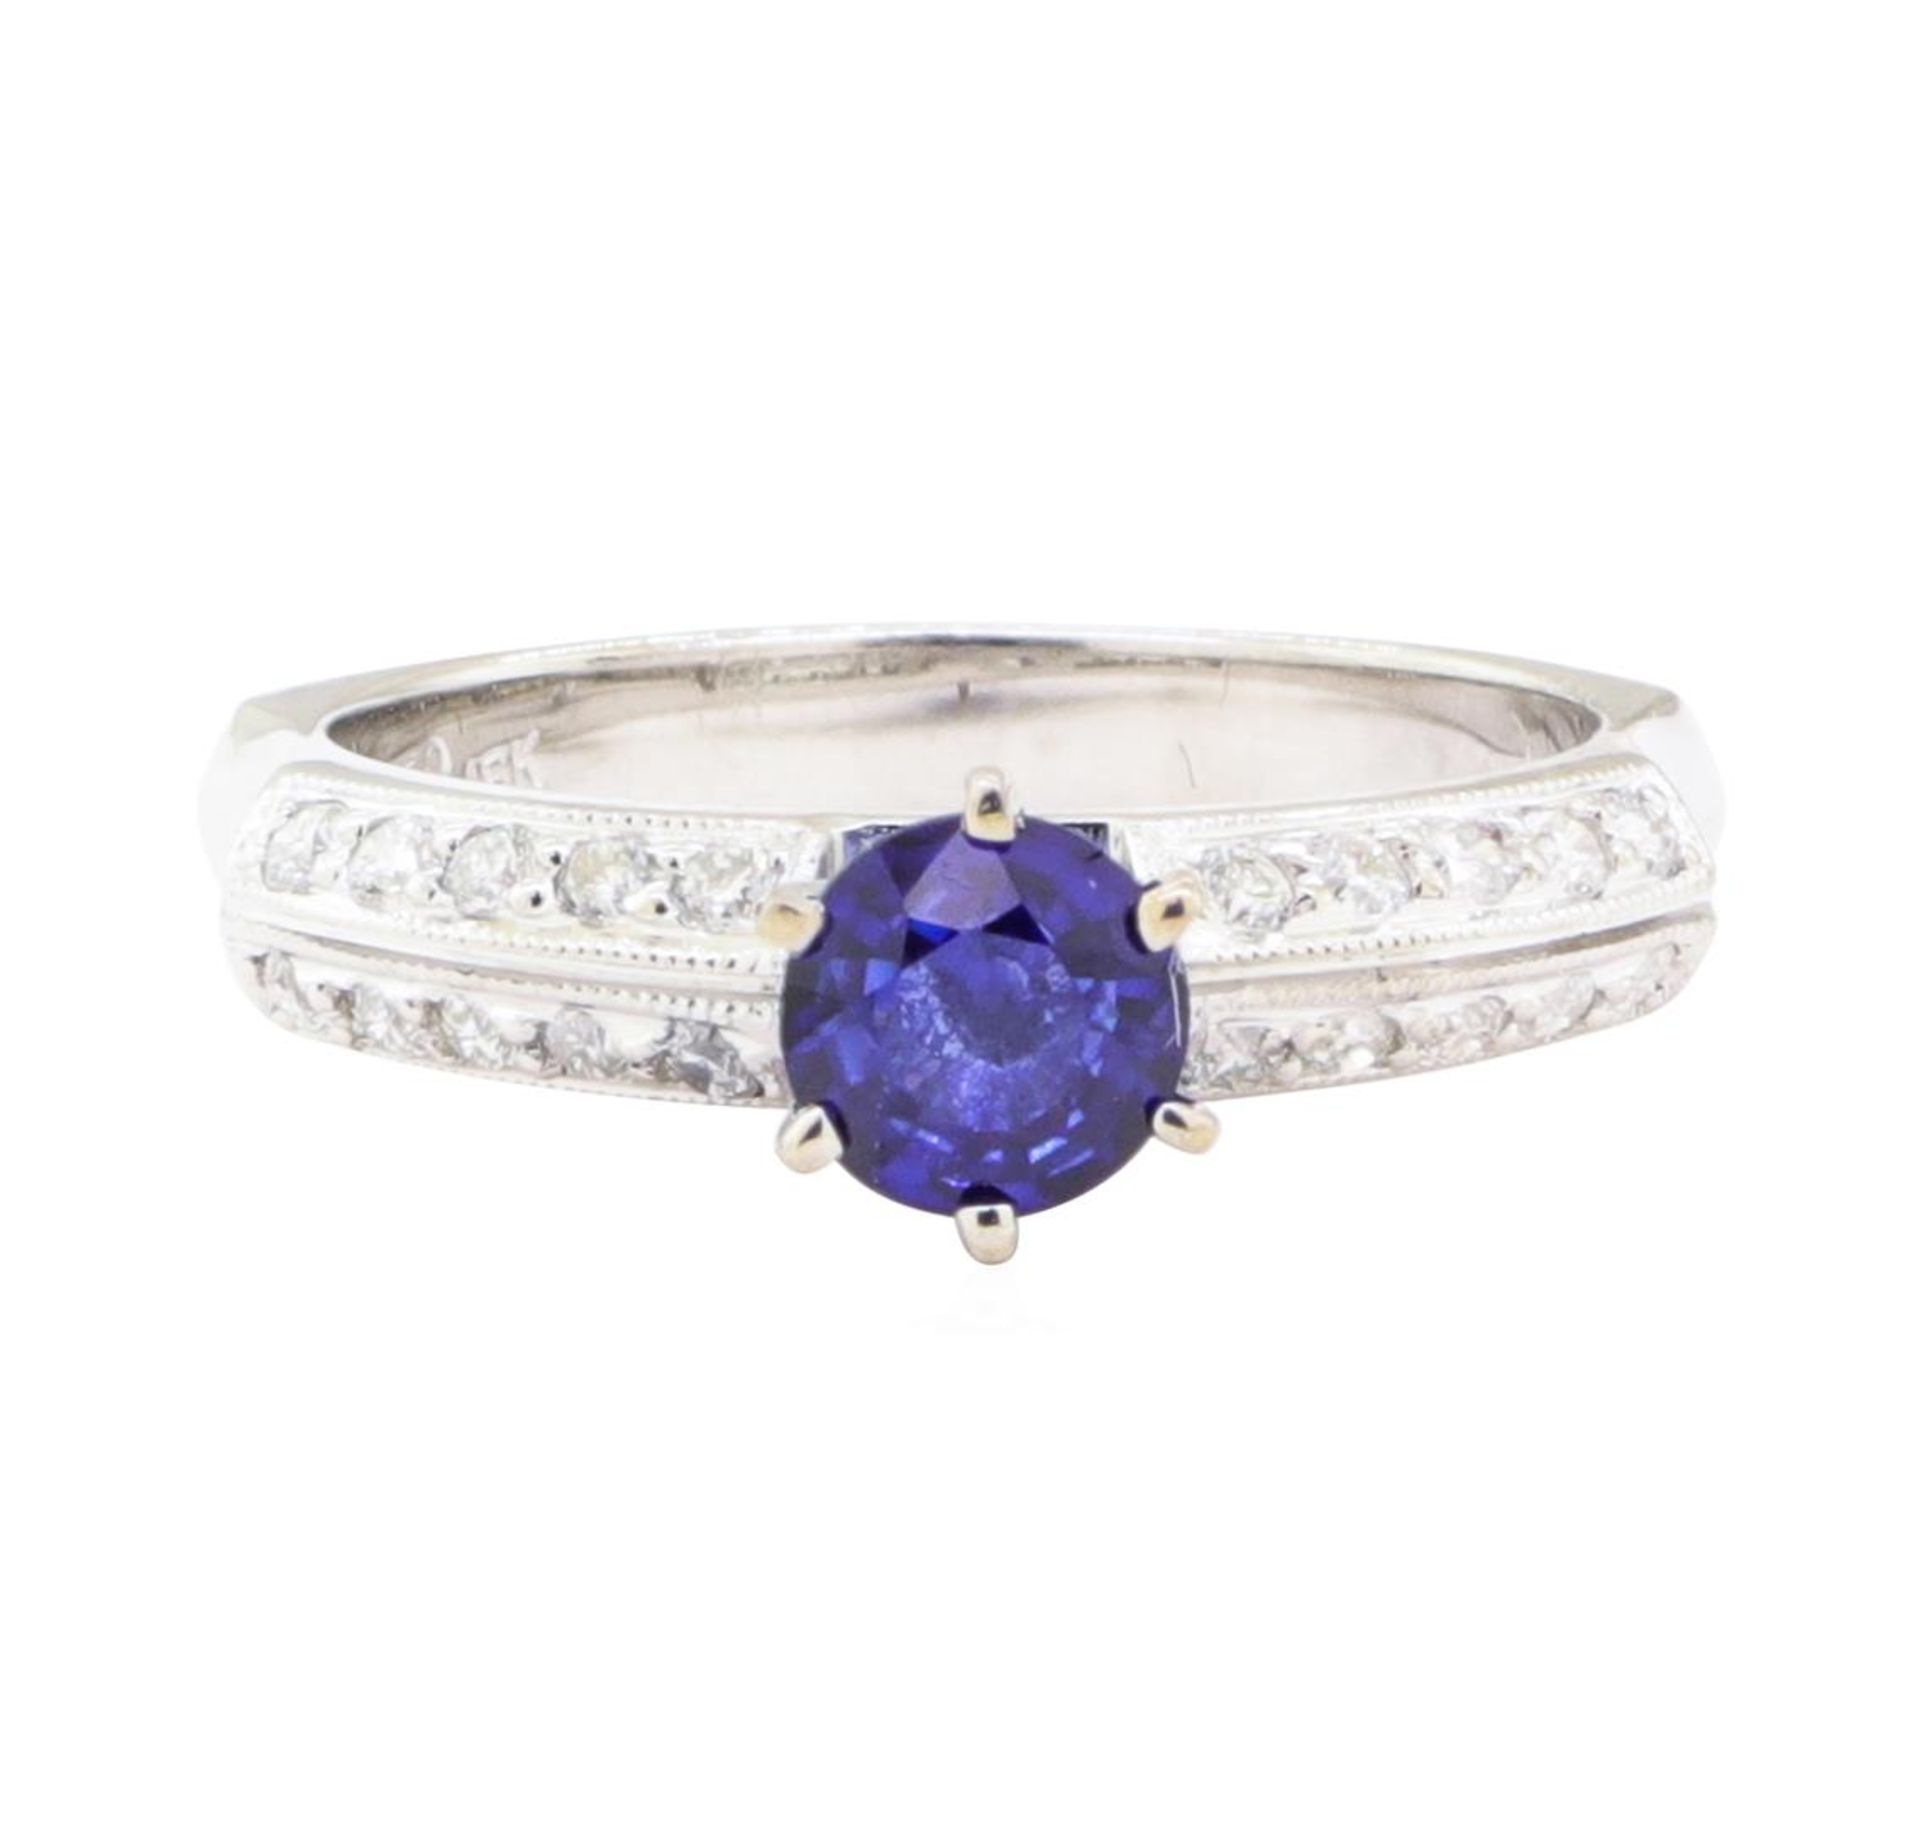 0.95 ctw Sapphire And Diamond Ring - 18KT White Gold - Image 4 of 10